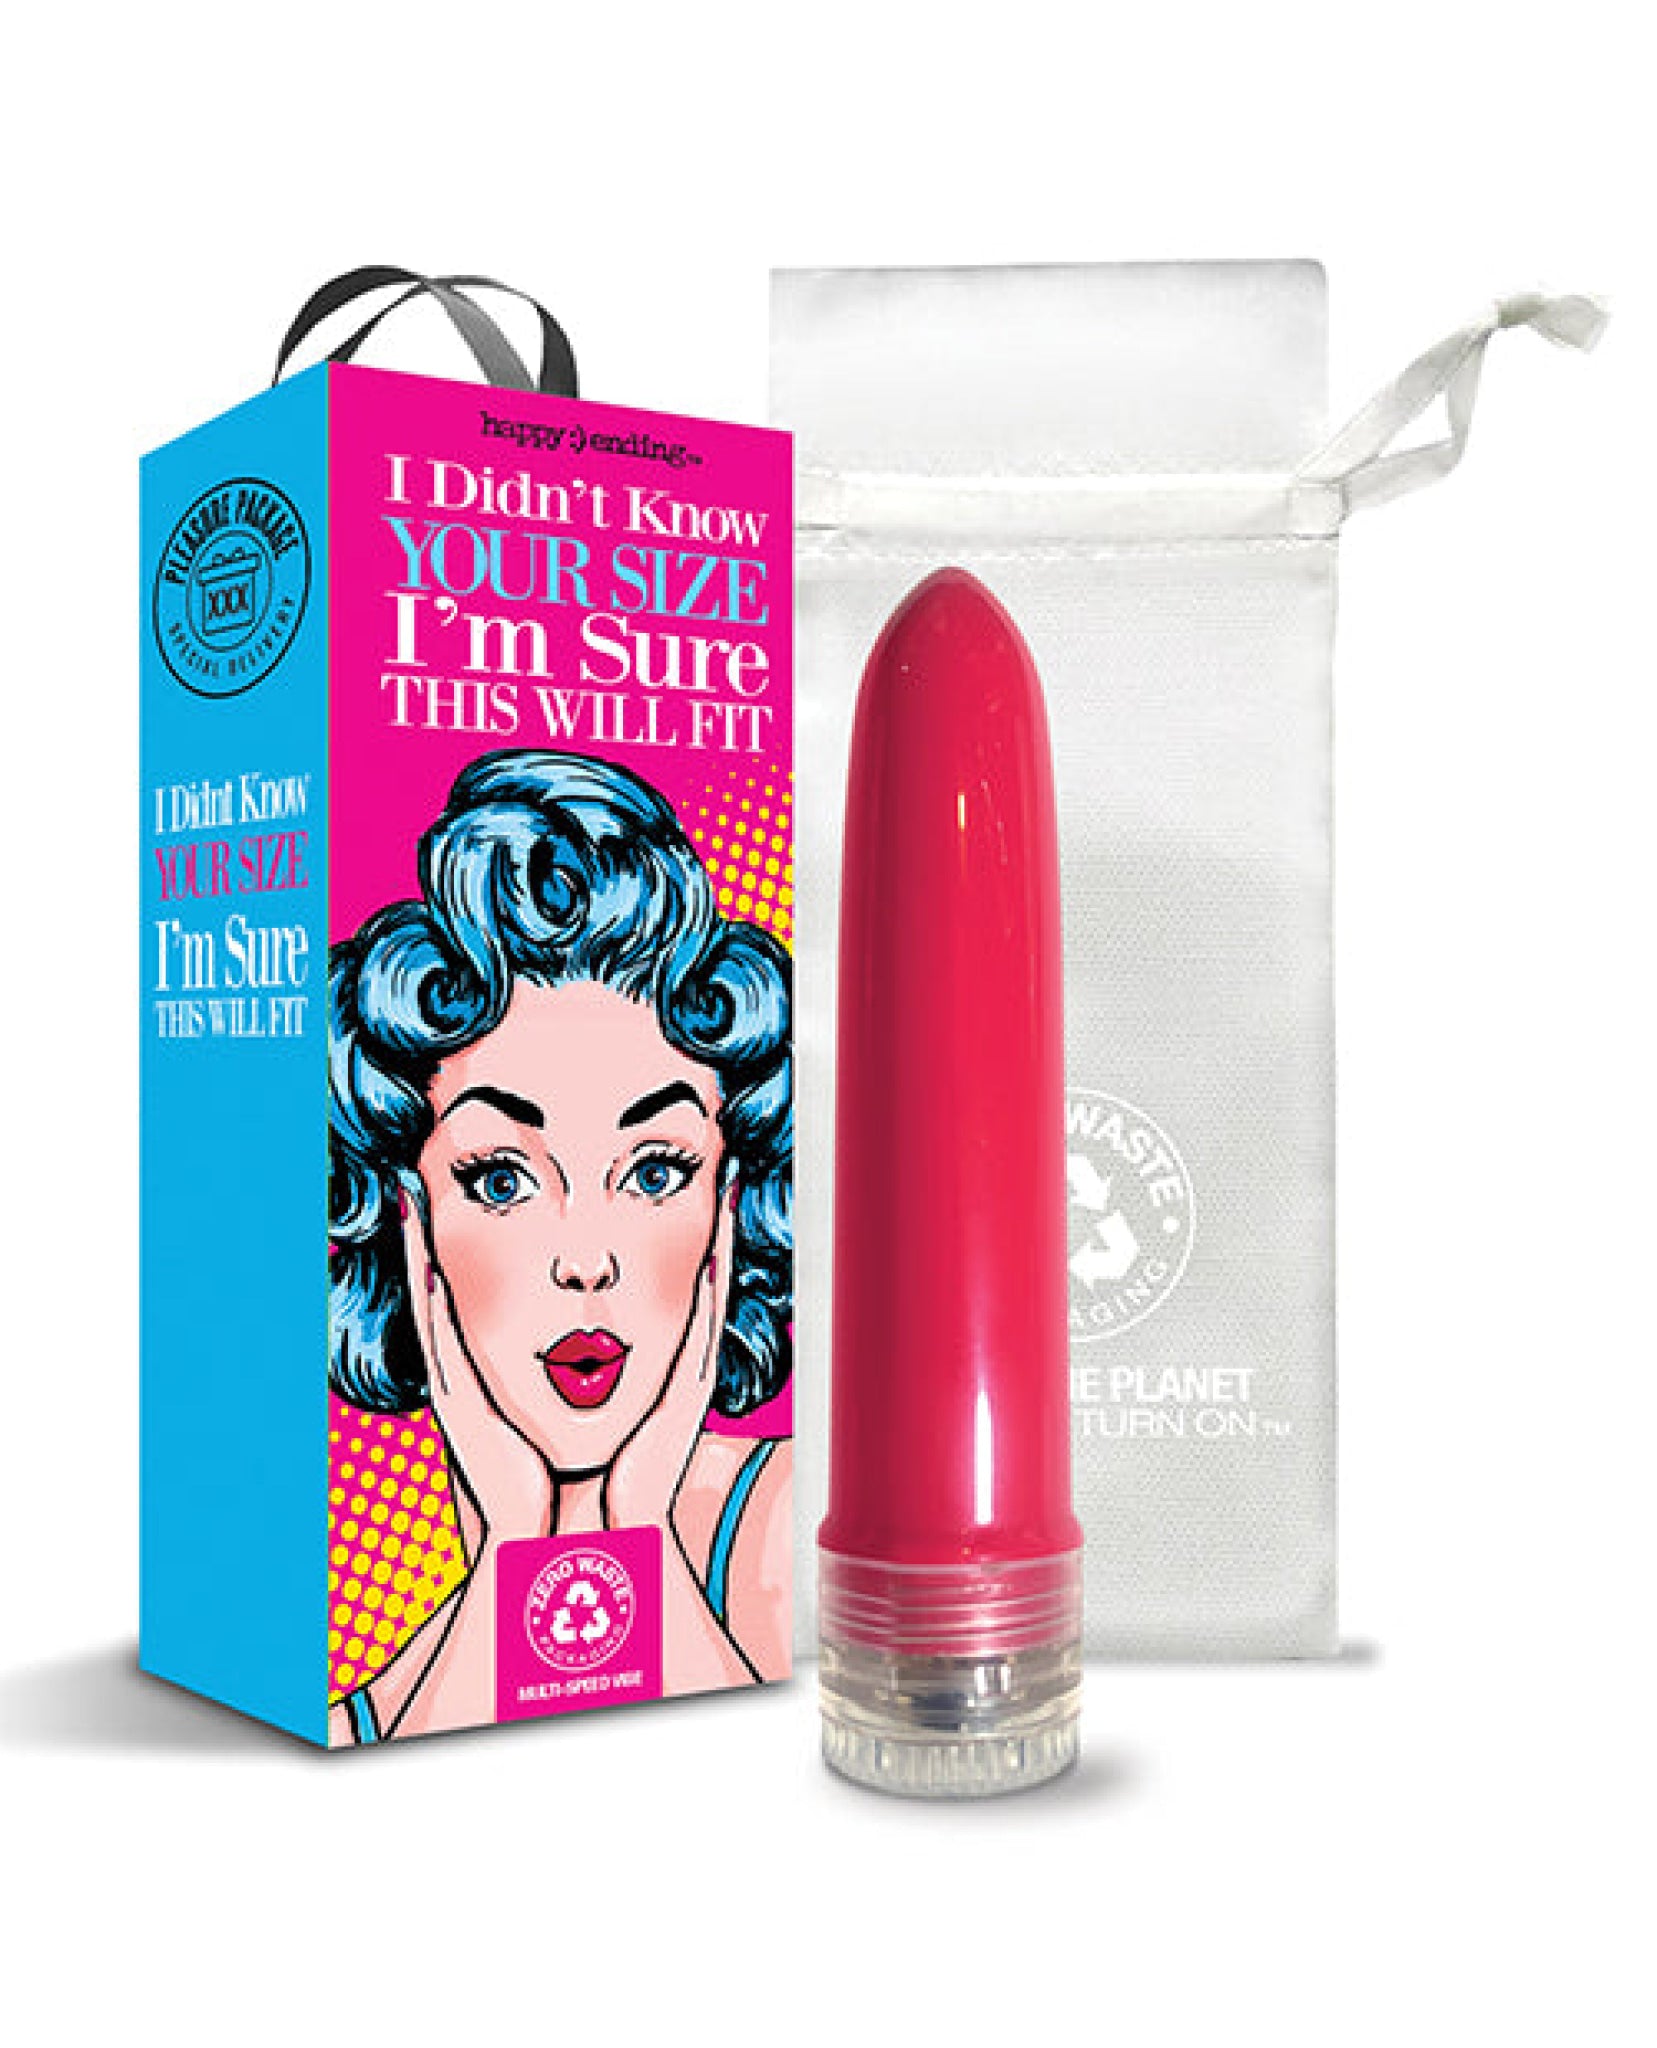 Pleasure Package I Didn't Know Your Size 4" Multi Speed Vibe  - Red The Happy Ending